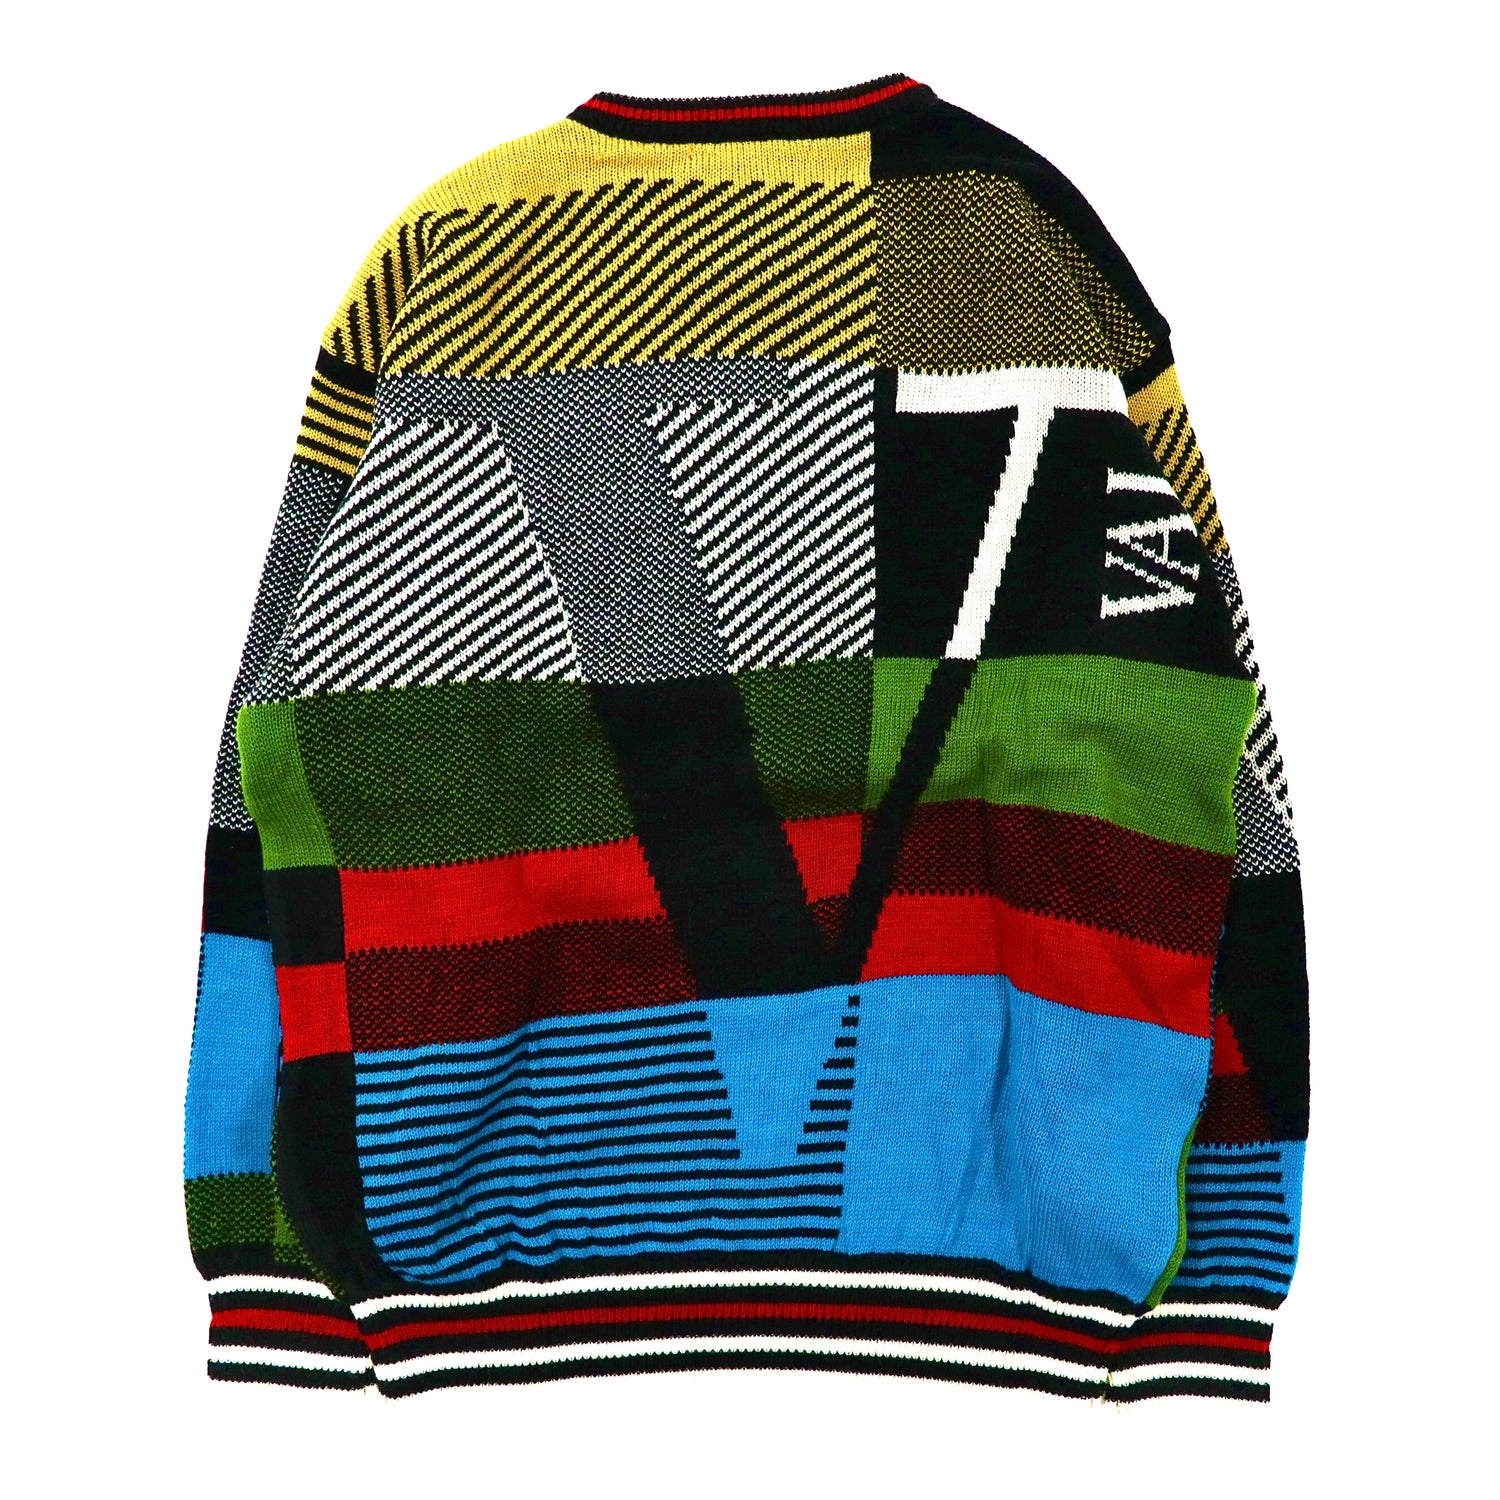 Big Size Patterned Knit Sweater L Multicolor Crazy Pattern Wool